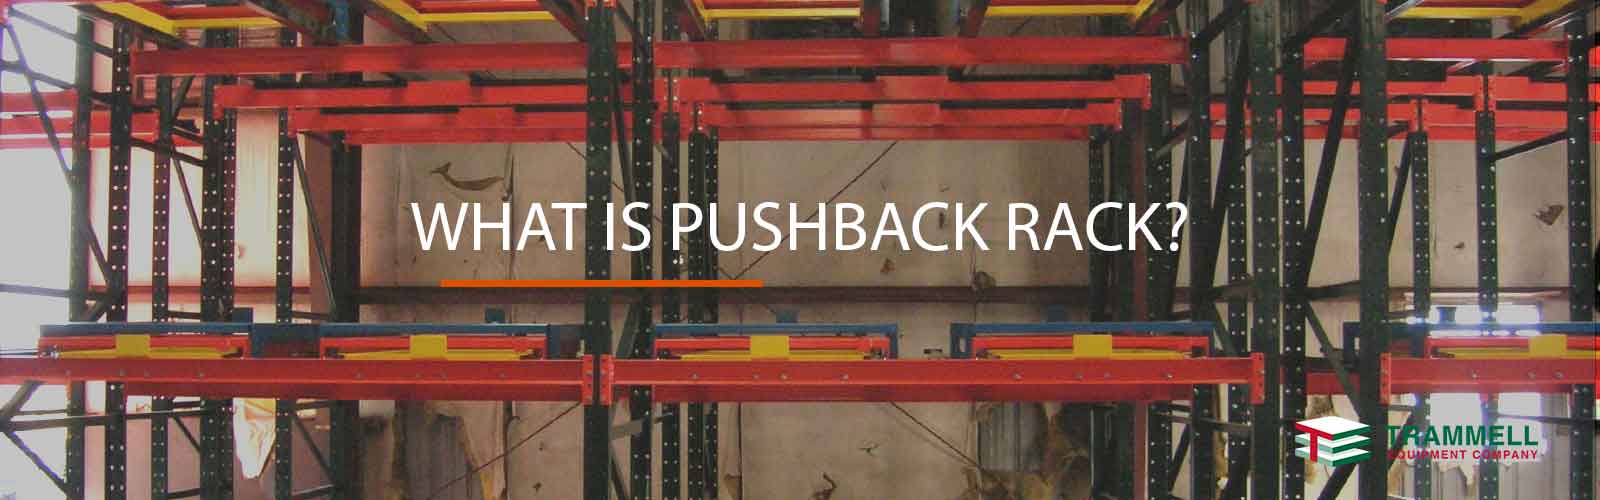 What is Pushback Rack?